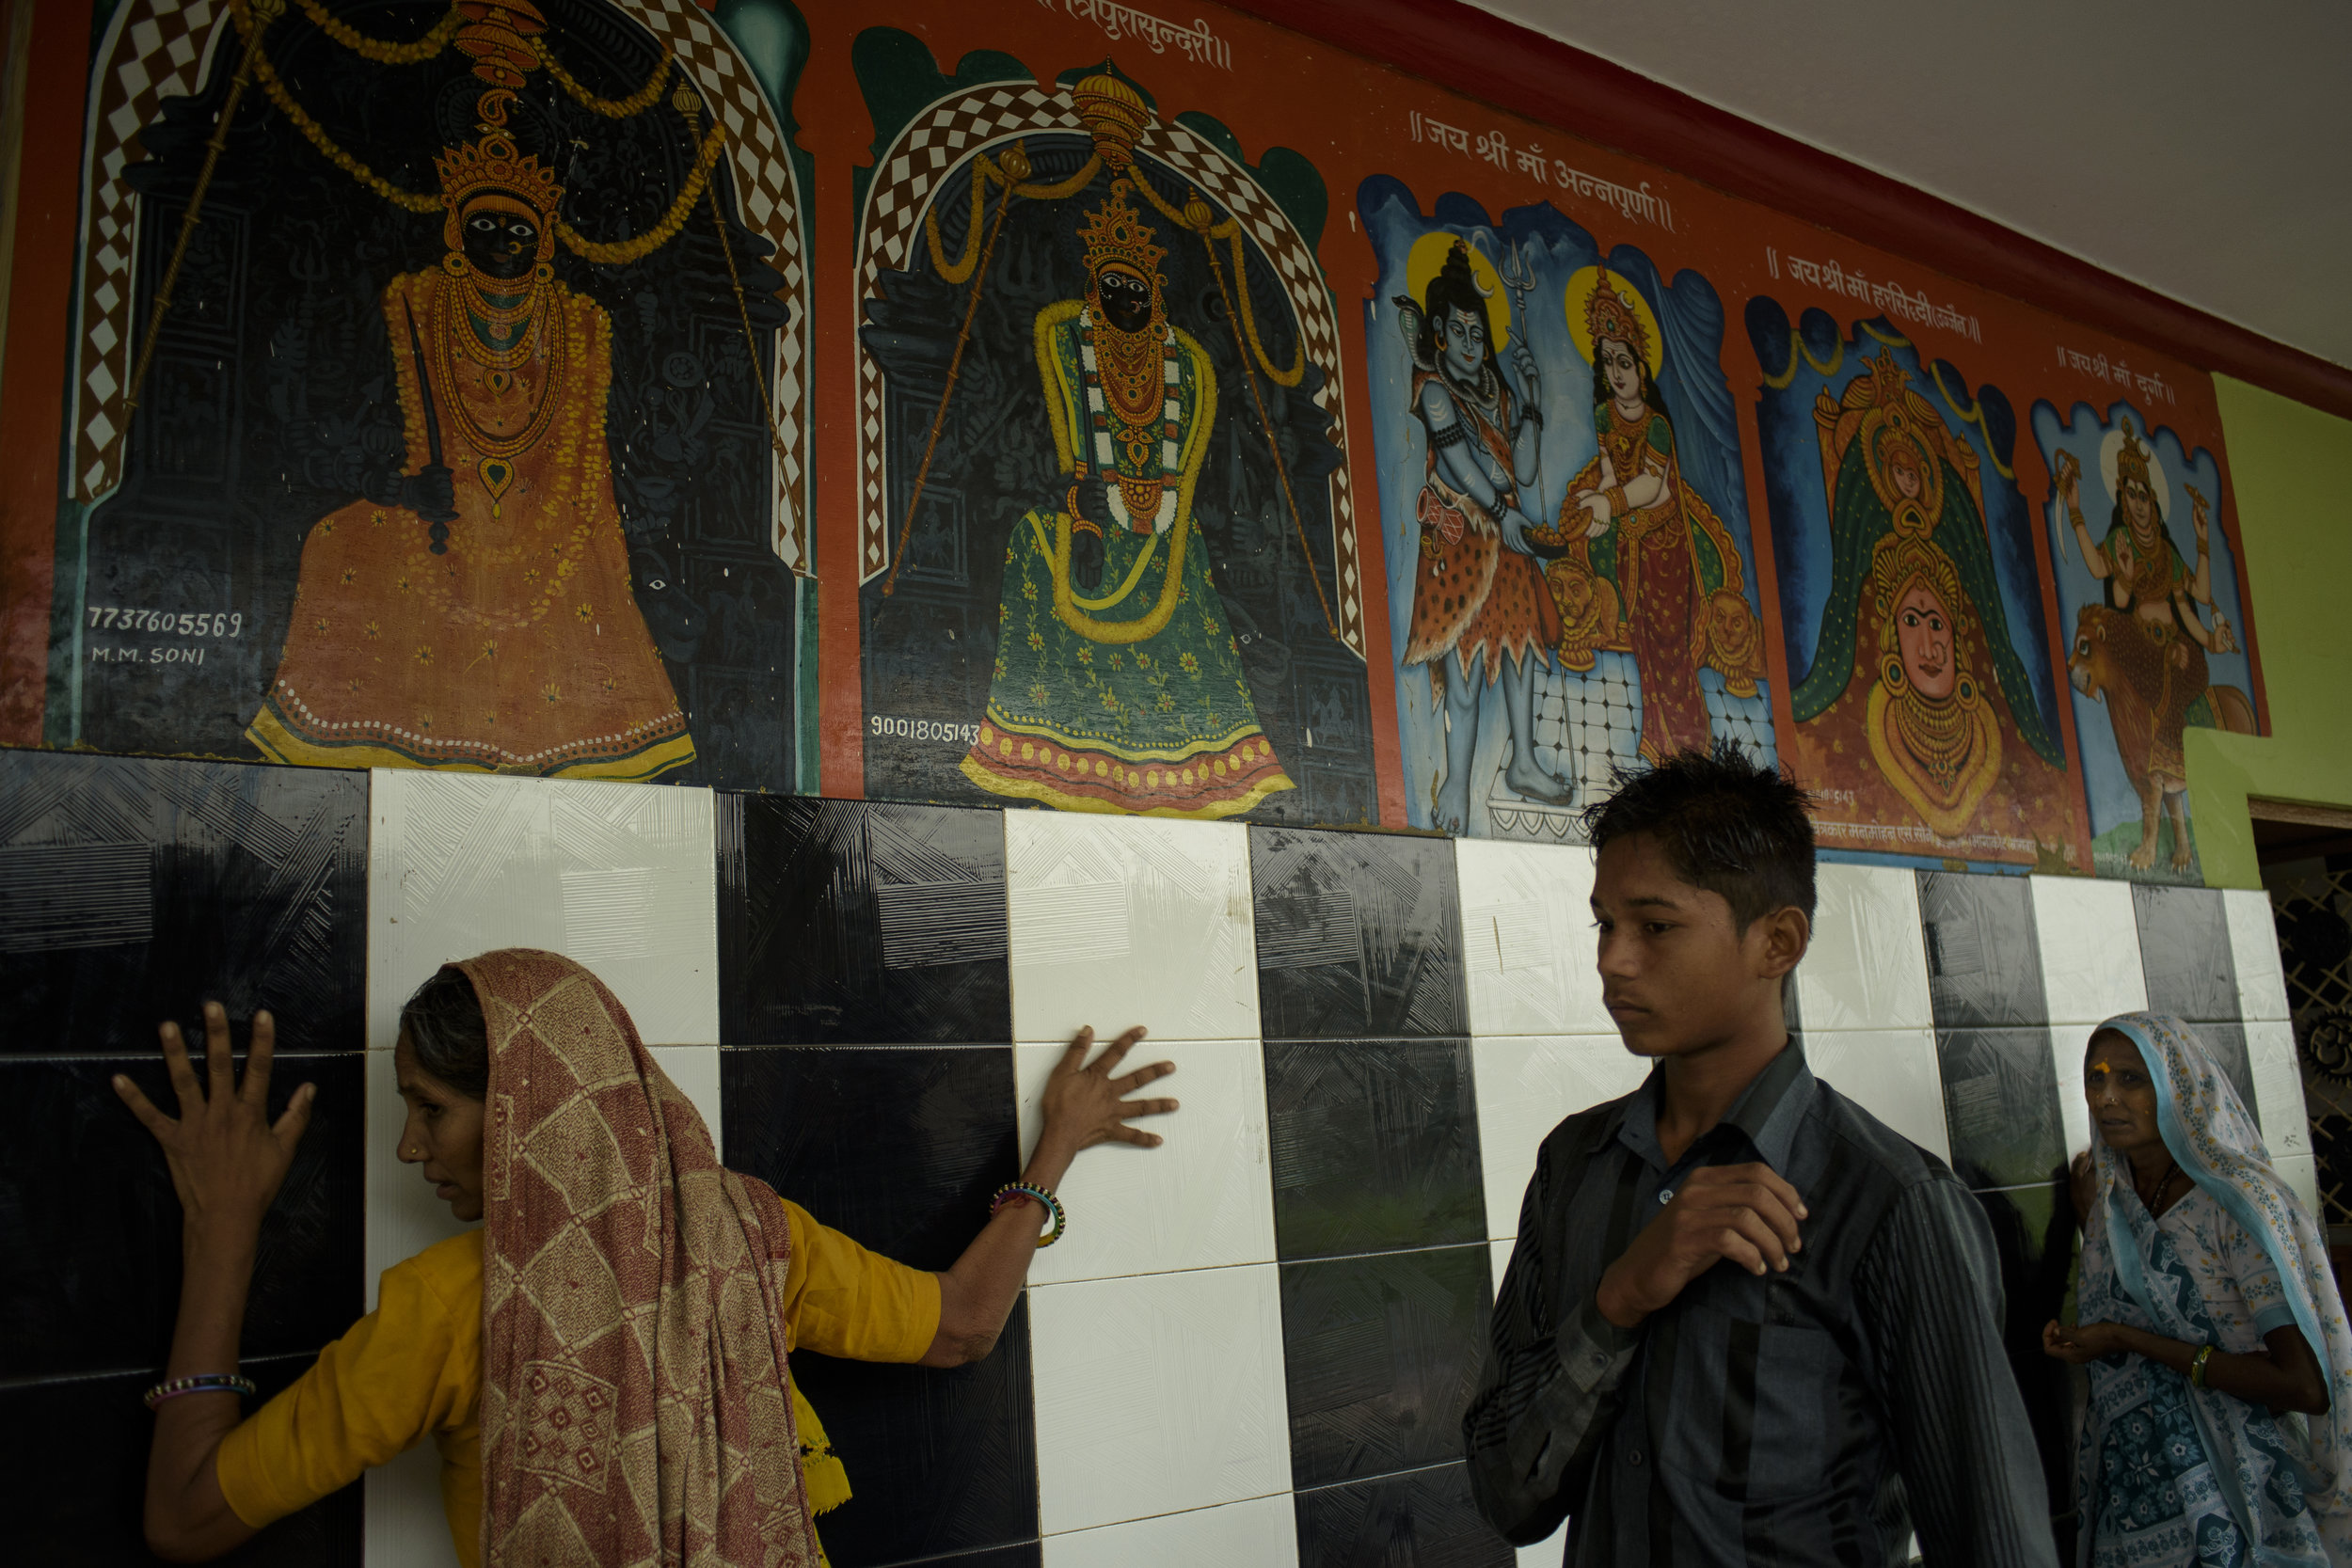  A woman touches the walls of the temple that is commonly known as Kupra Maata Ka Mandir, situated 5 kilometres from Banswara town. The villagers hold immense faith in healing through ceremonies that take place in the temple compound every weekend. 